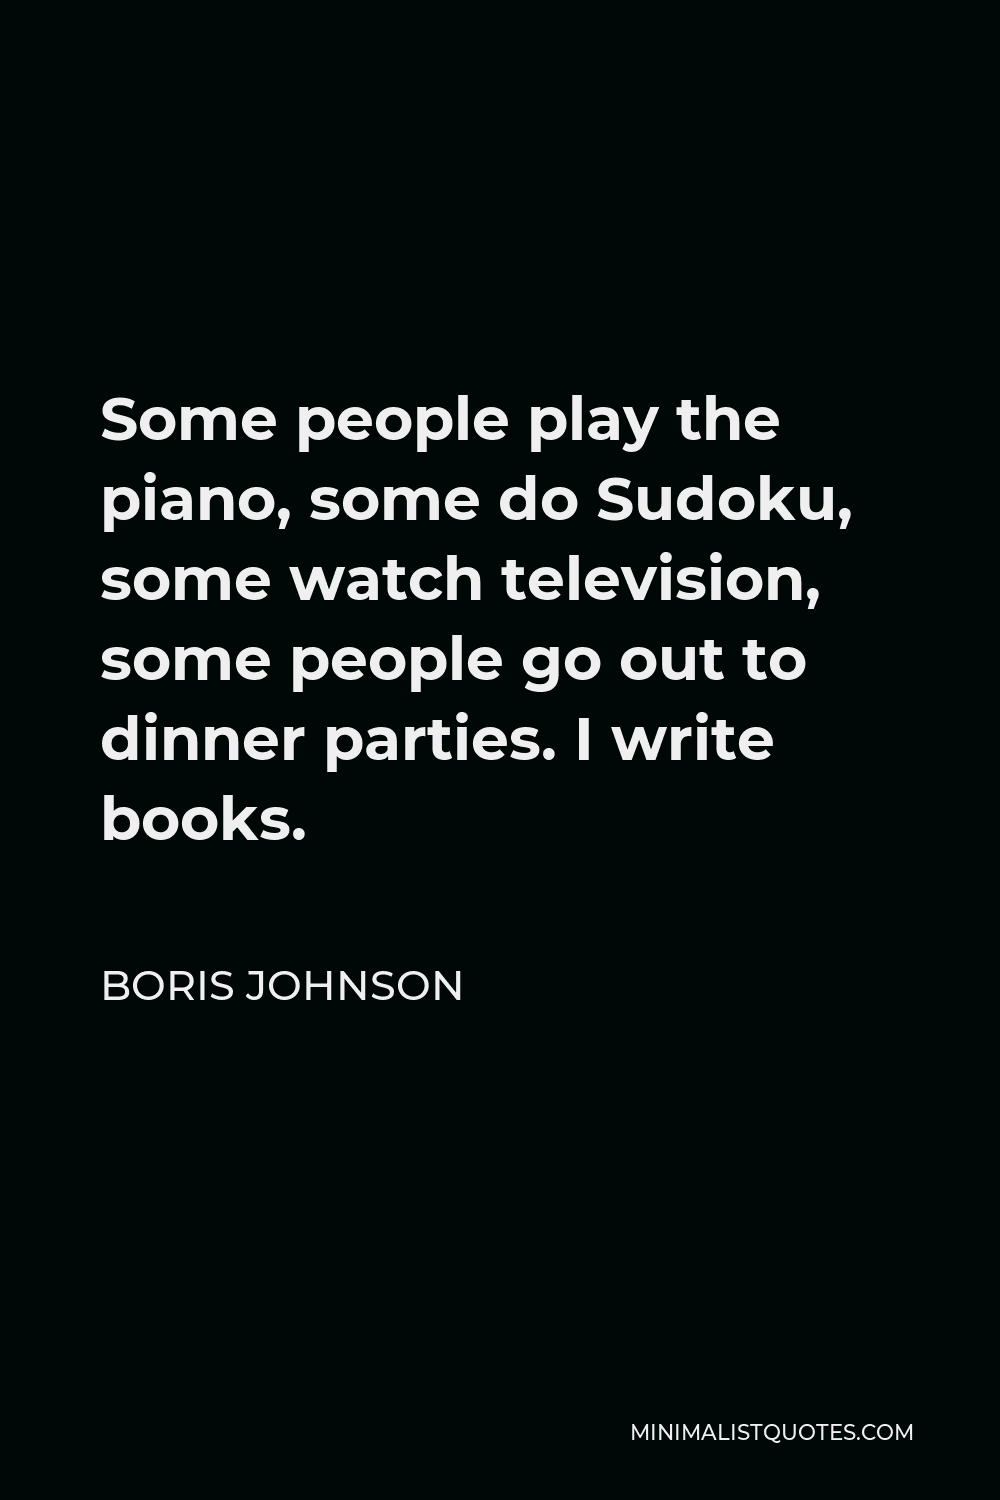 Boris Johnson Quote - Some people play the piano, some do Sudoku, some watch television, some people go out to dinner parties. I write books.